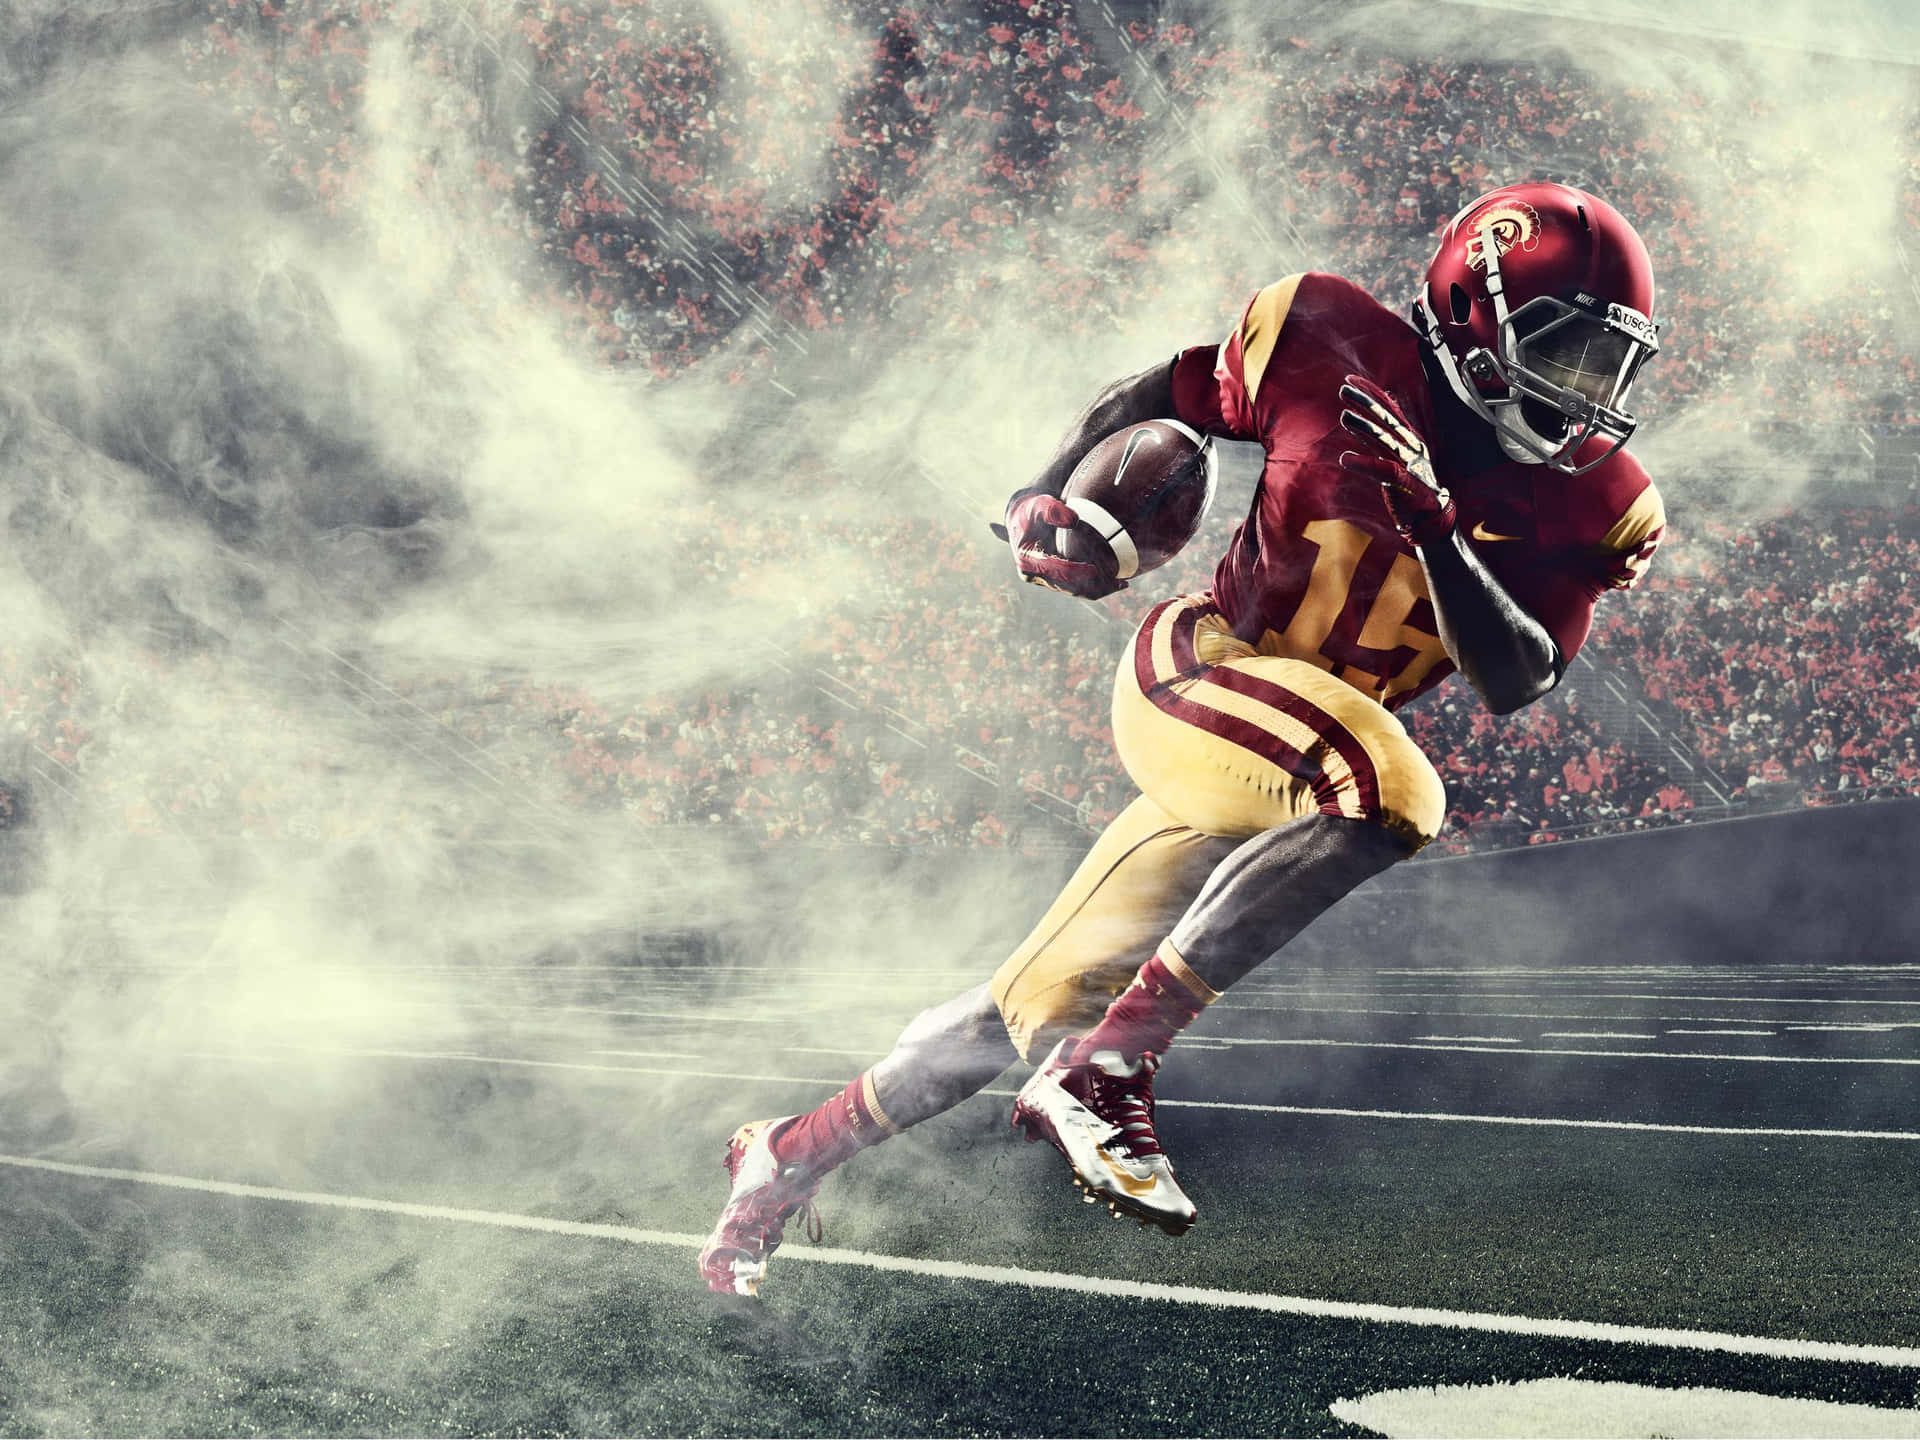 Awesome Running Football Player Wallpaper